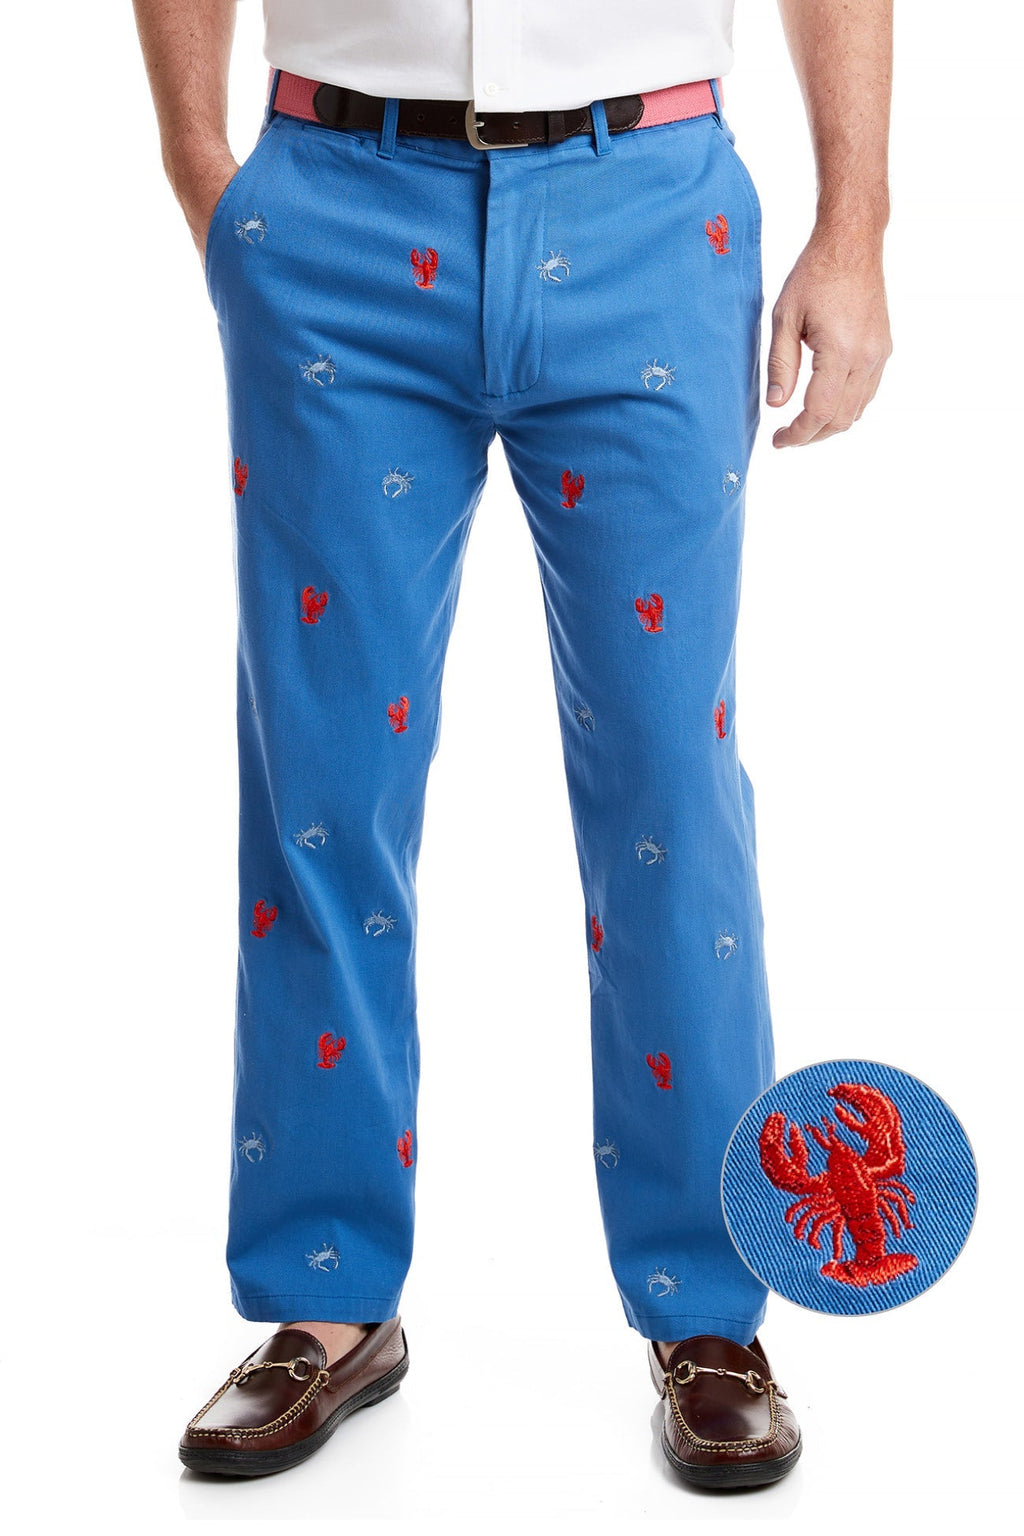 Harbor Pant Stretch Twill Deep Ocean Blue with Crab & Lobster MENS EMBROIDERED PANTS Castaway Nantucket Island